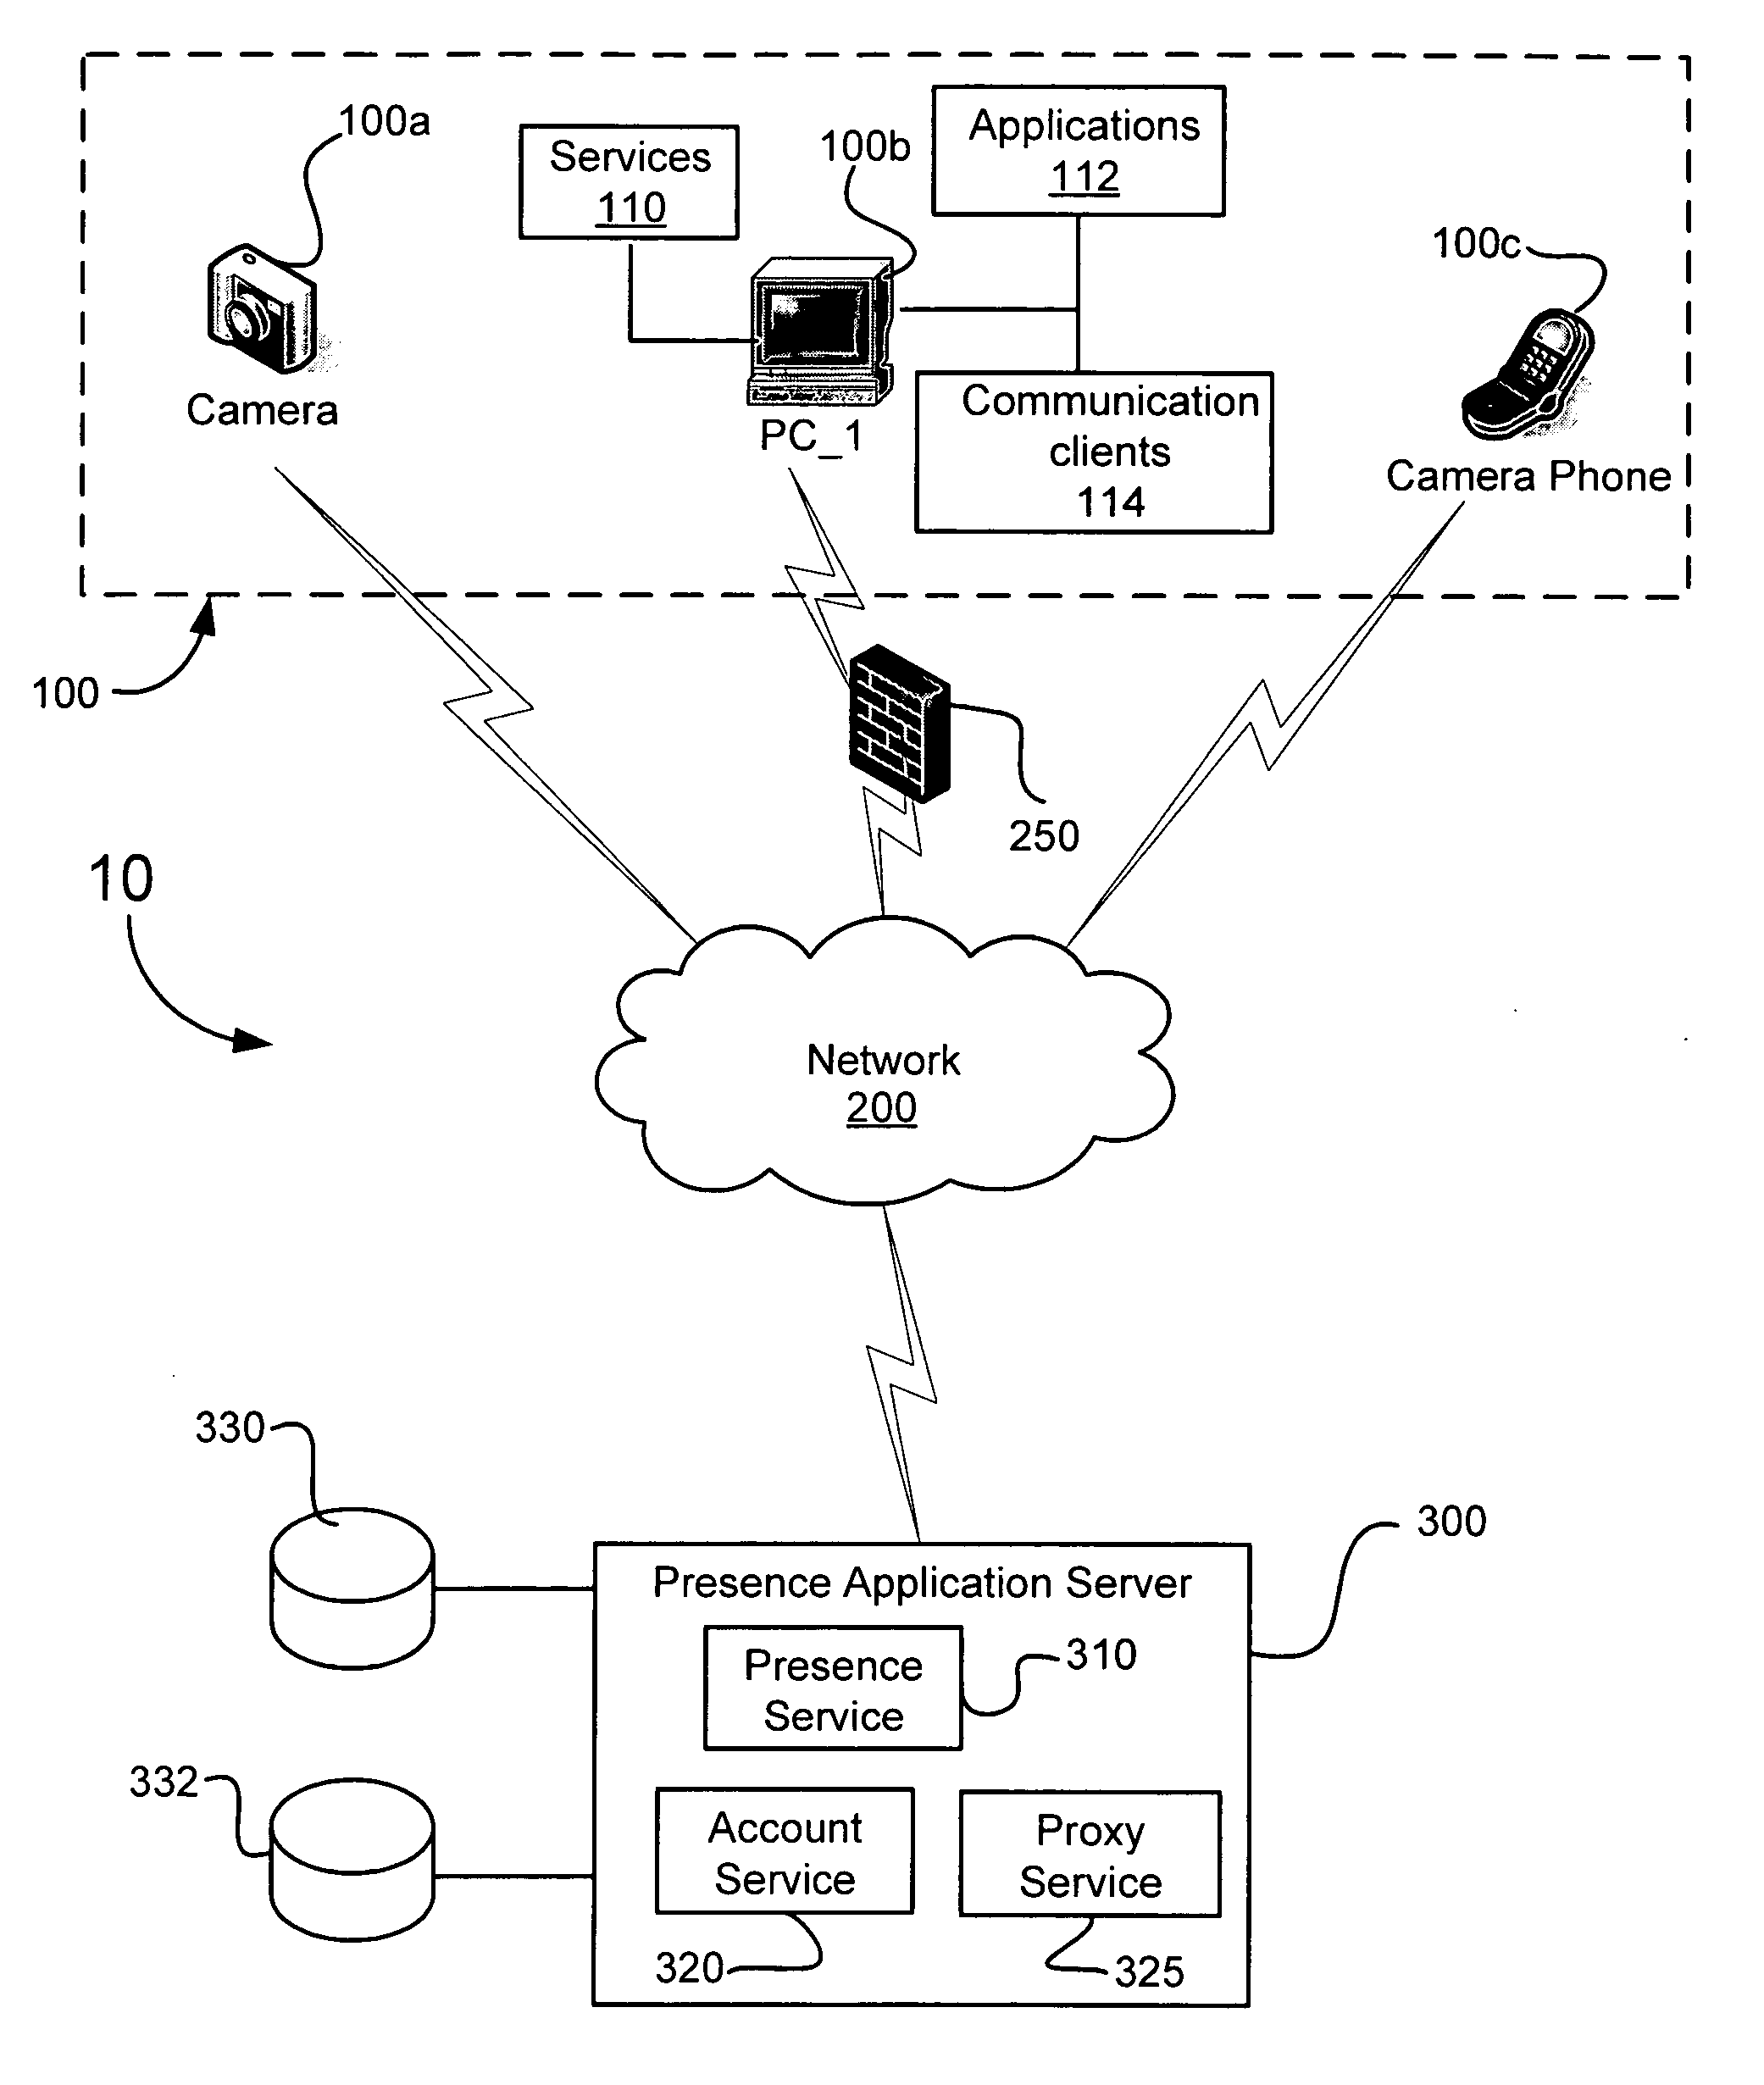 System and method for utilizing a presence service to facilitate access to a service or application over a network